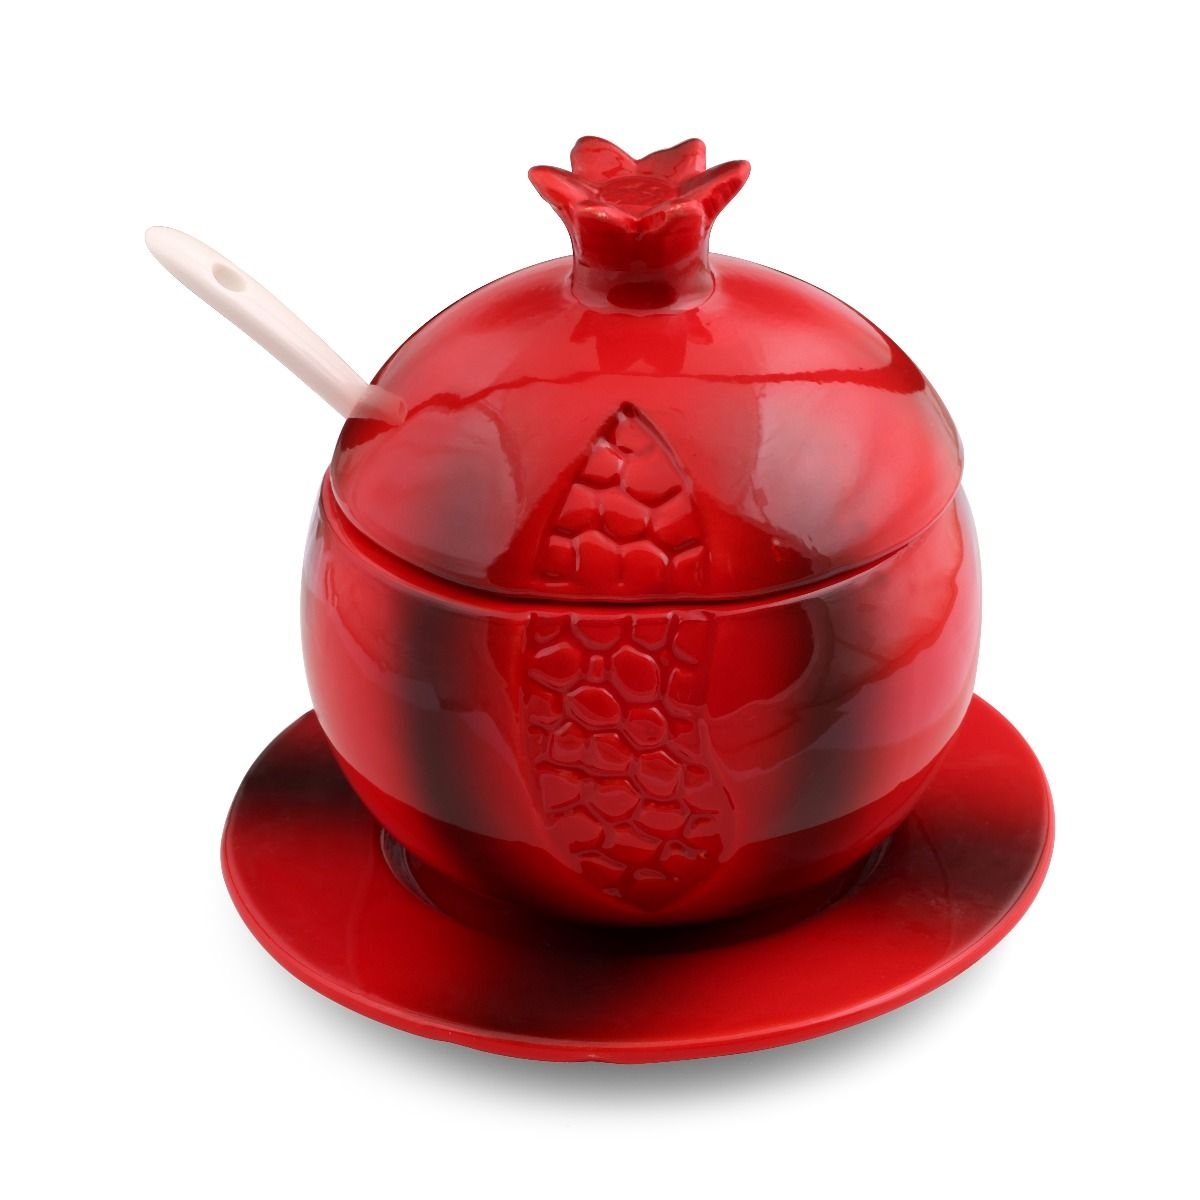 Red Ceramic Pomegranate Honey Dish with Spoon and Saucer - 1